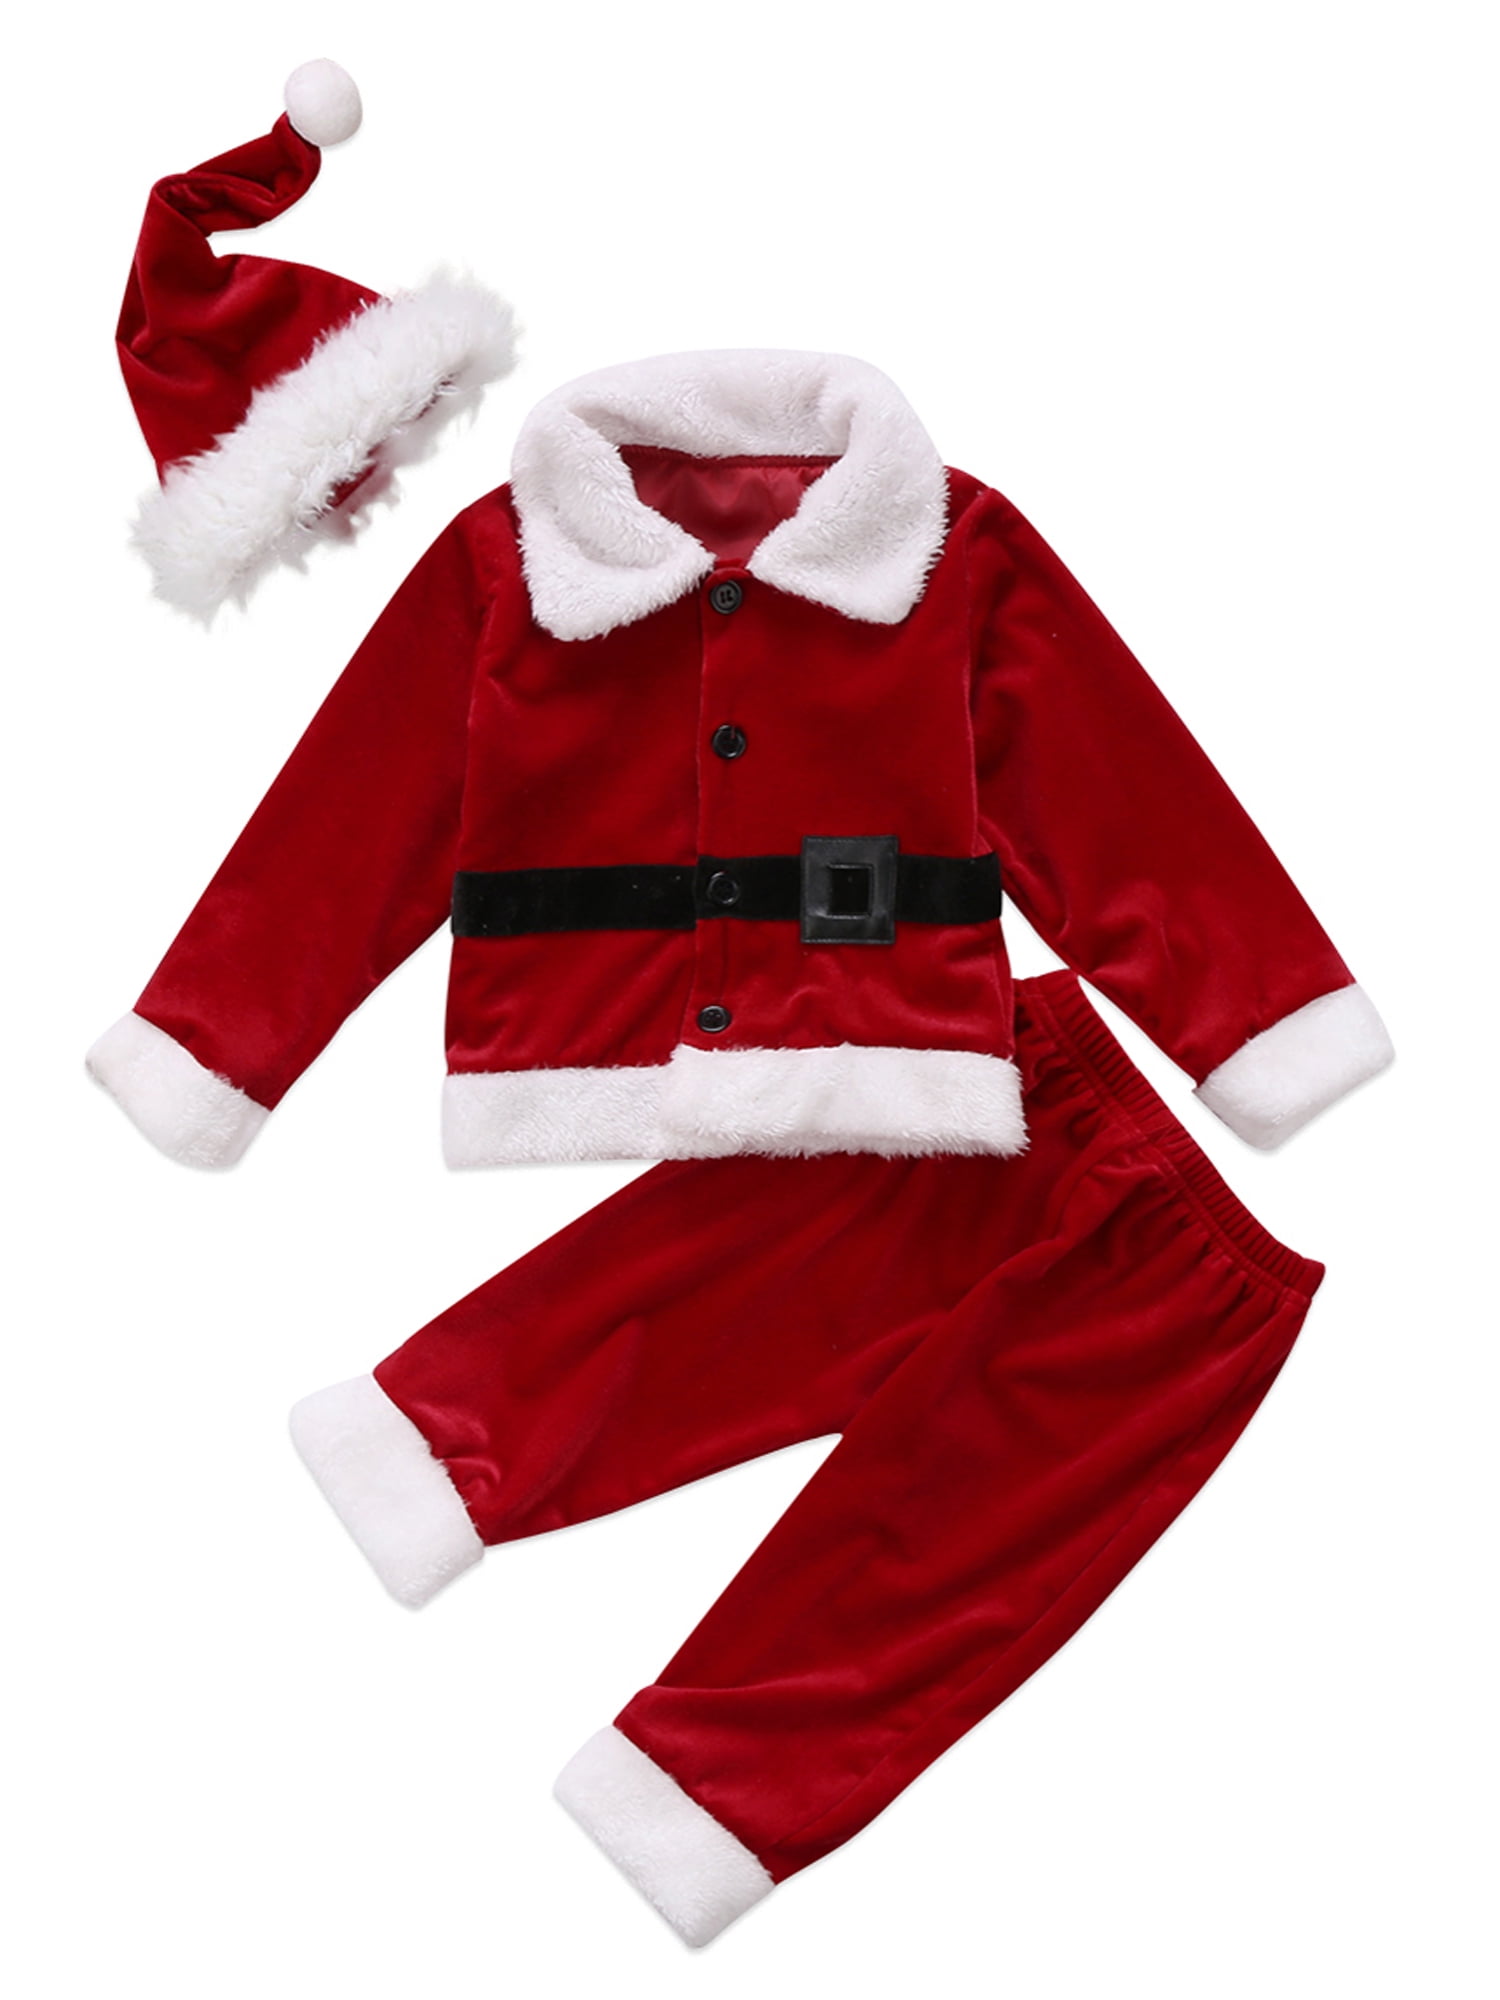 Baby Kids Girls Xmas Christmas Santa Claus Costume Dress Fancy Outfit Party Set 